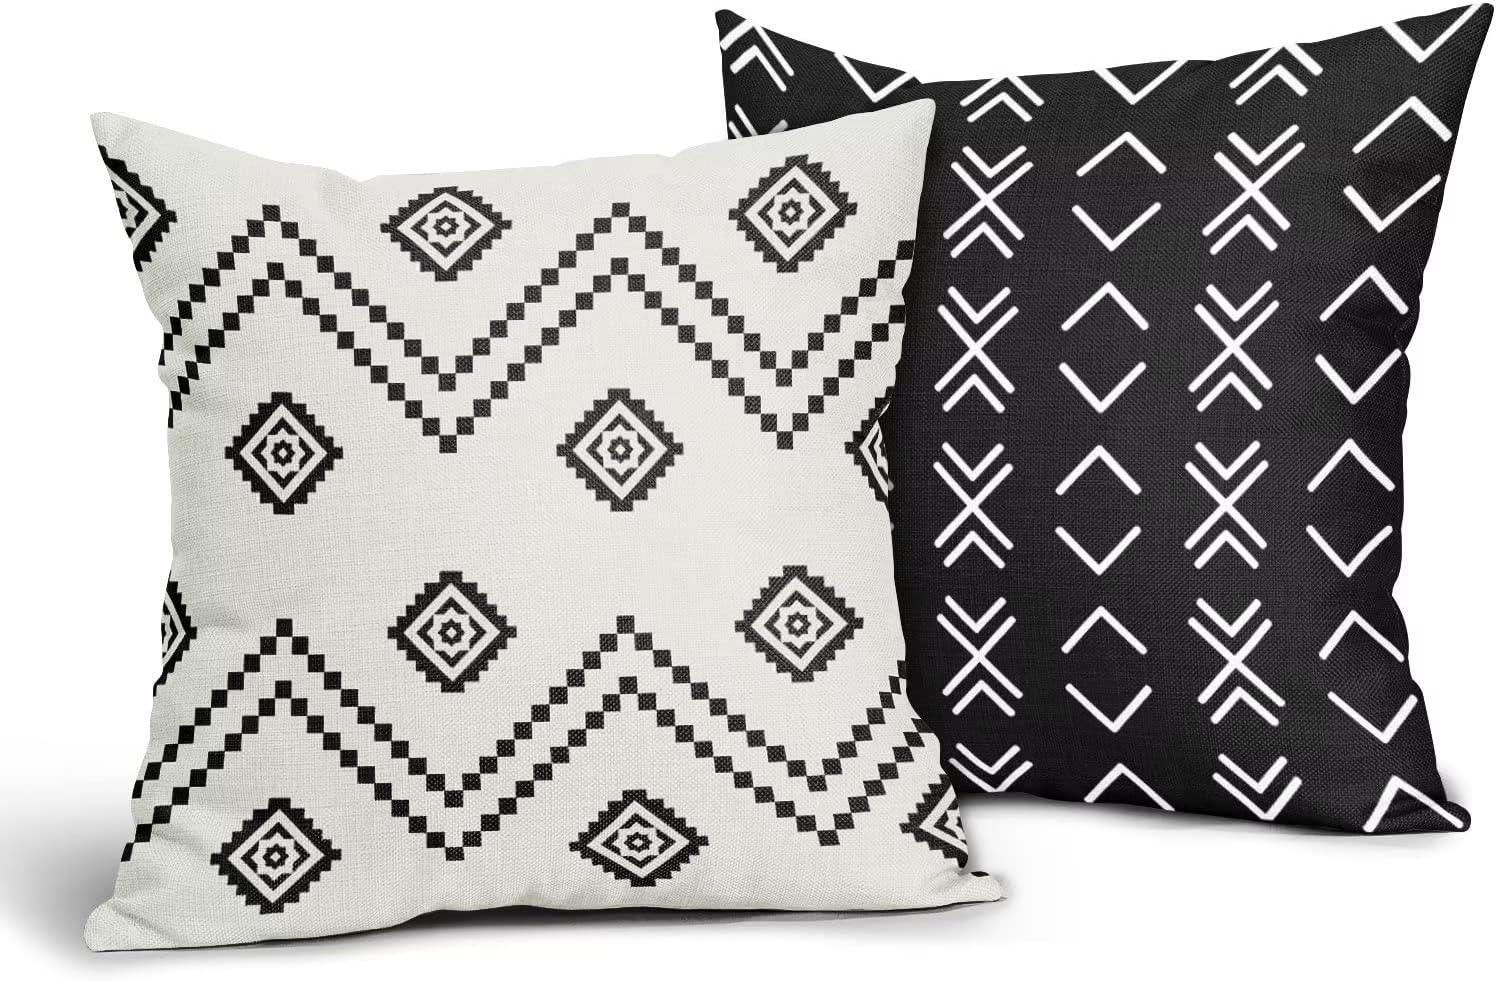 ABSOP Boho Throw Pillow Covers 18x18 Inch Set of 2 Farmhouse White and Black Pillow Covers Room Decor Modern Geometric Pillowcases Linen Cushion Cover for Sofa Bedroom Outdoor Indoor Decoration